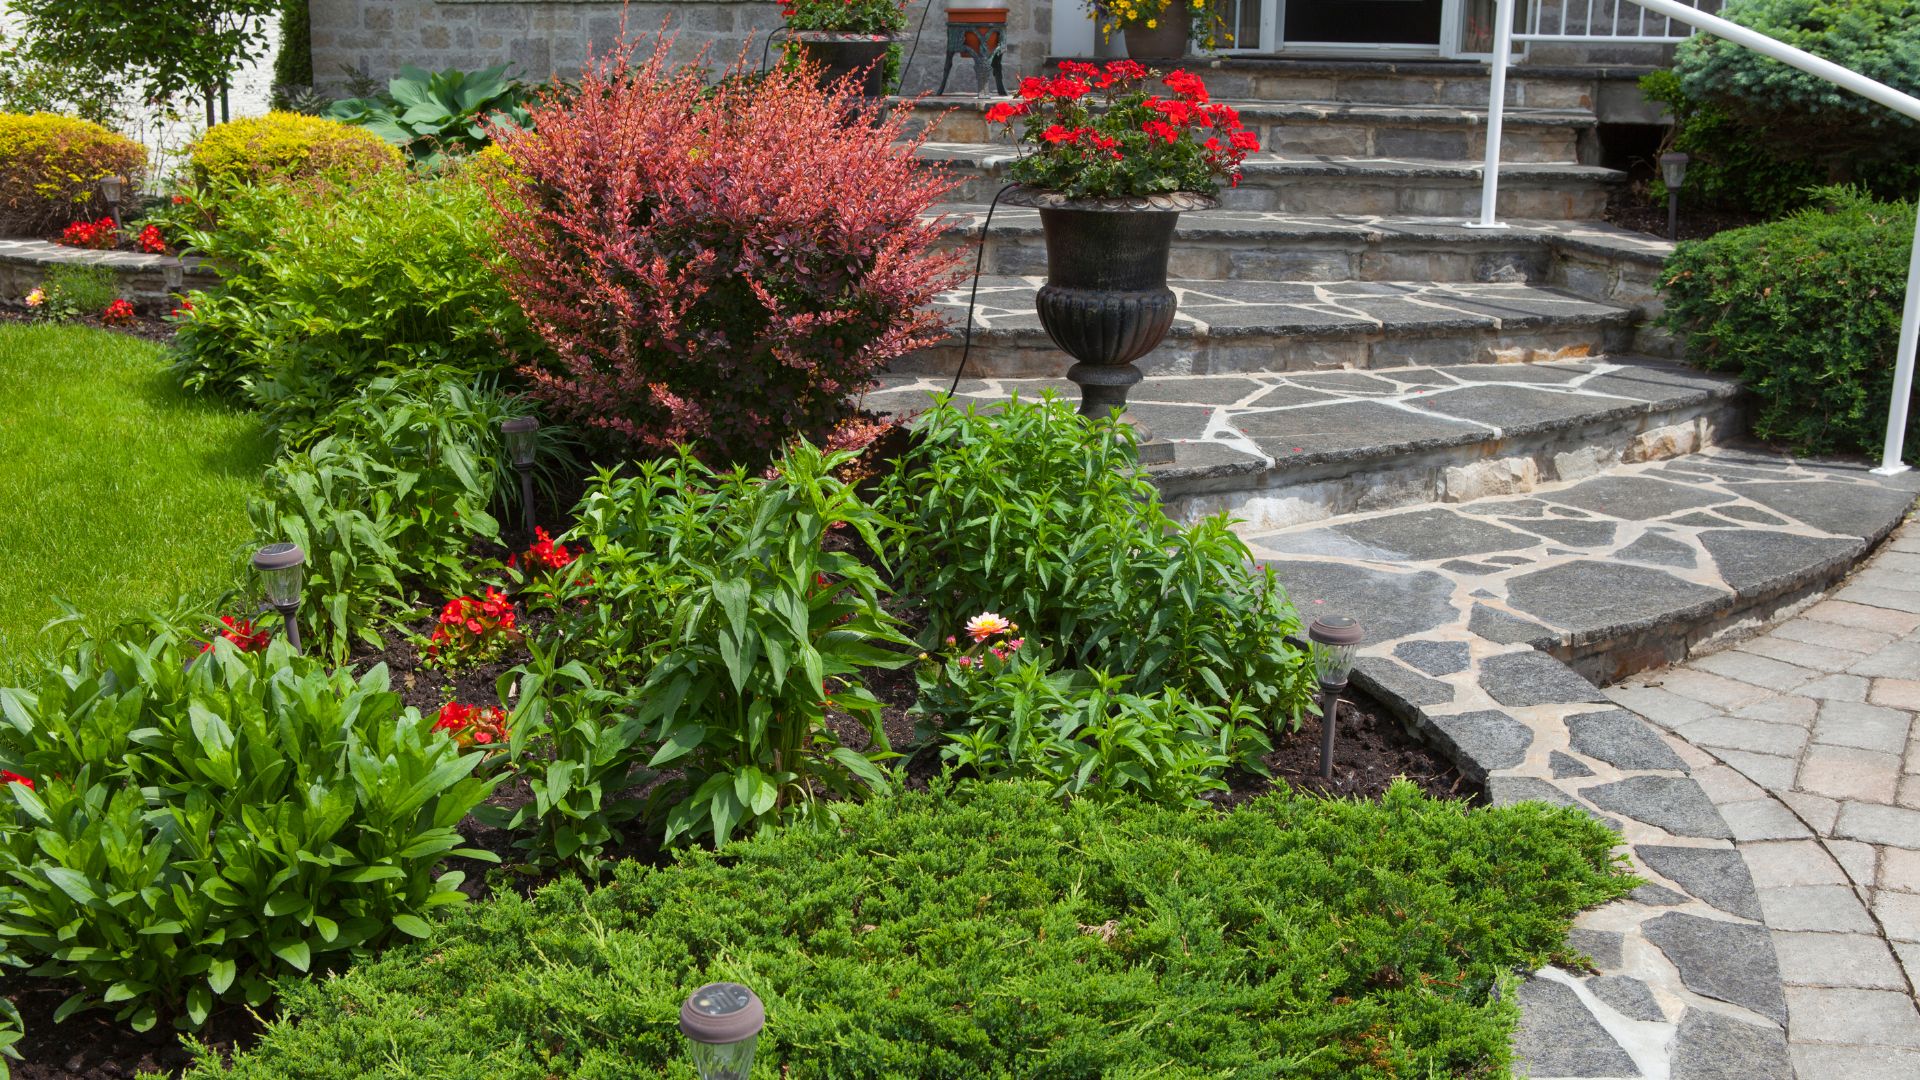 Lawn-Free Front Yards Are Trending And Easy To Set Up